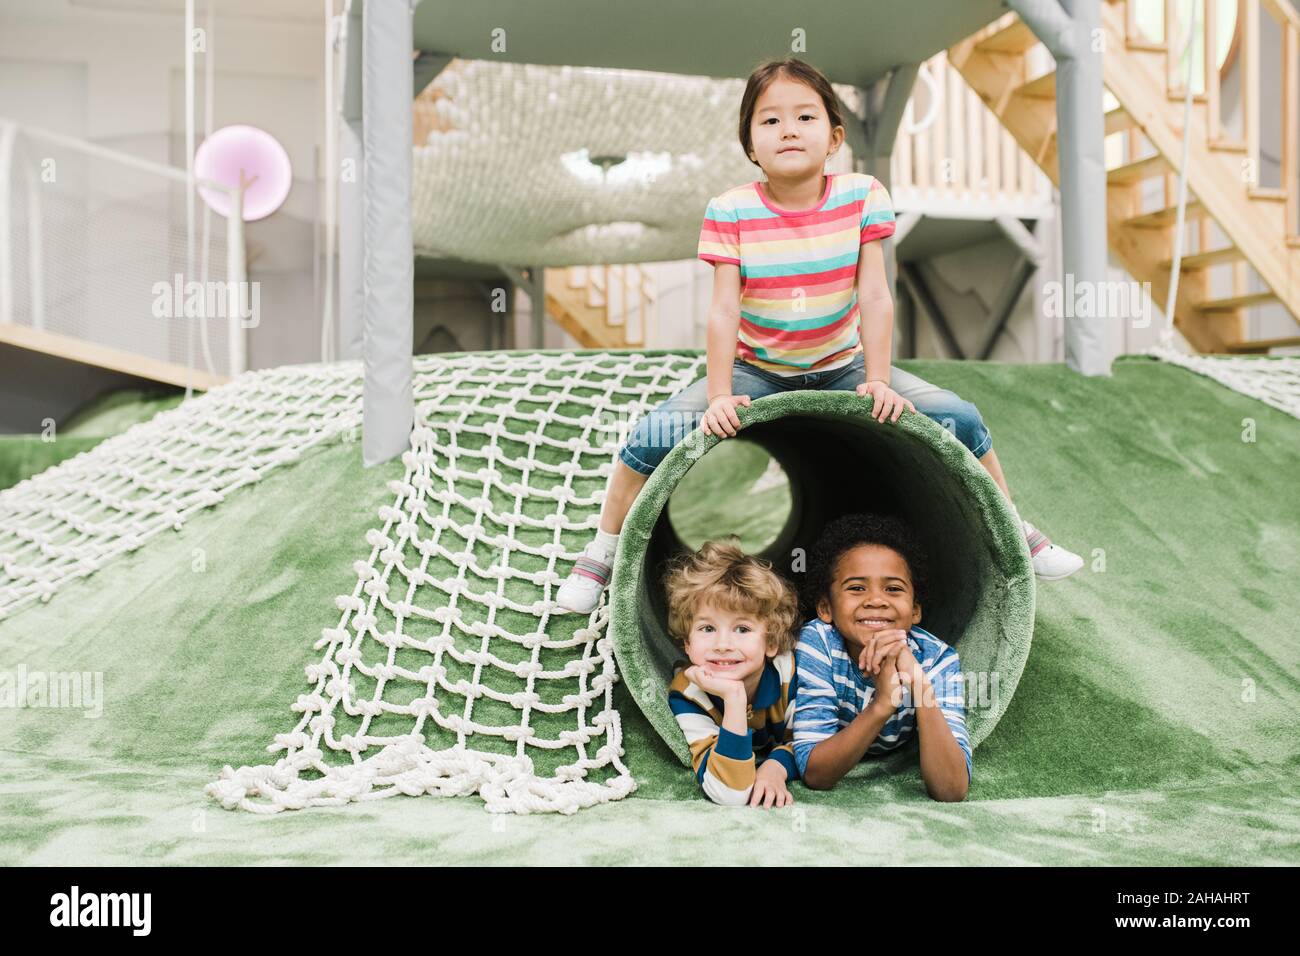 Cheerful and friendly intercultural little kids having fun together on play area Stock Photo